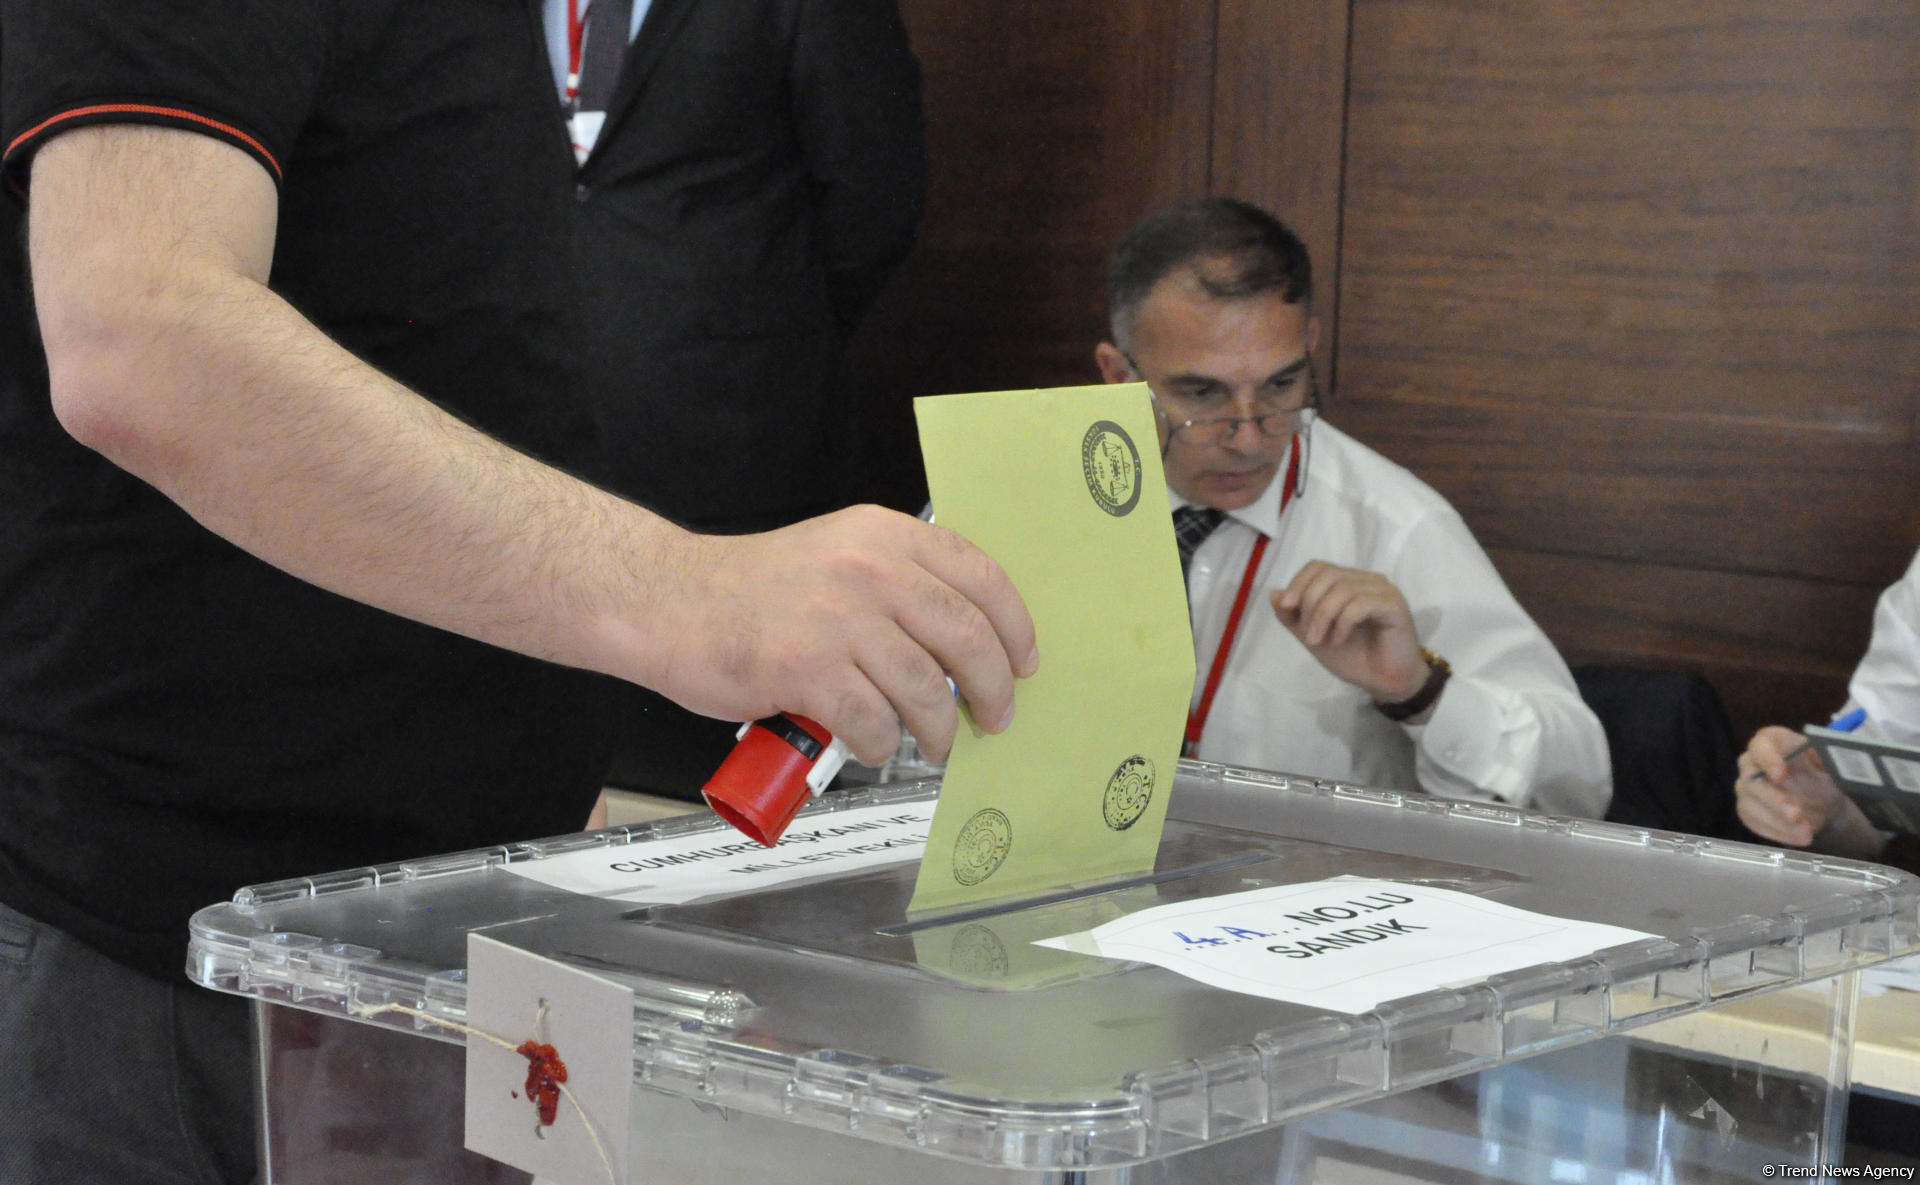 Turkish citizens living in Azerbaijan vote in parliamentary, presidential elections (PHOTO)